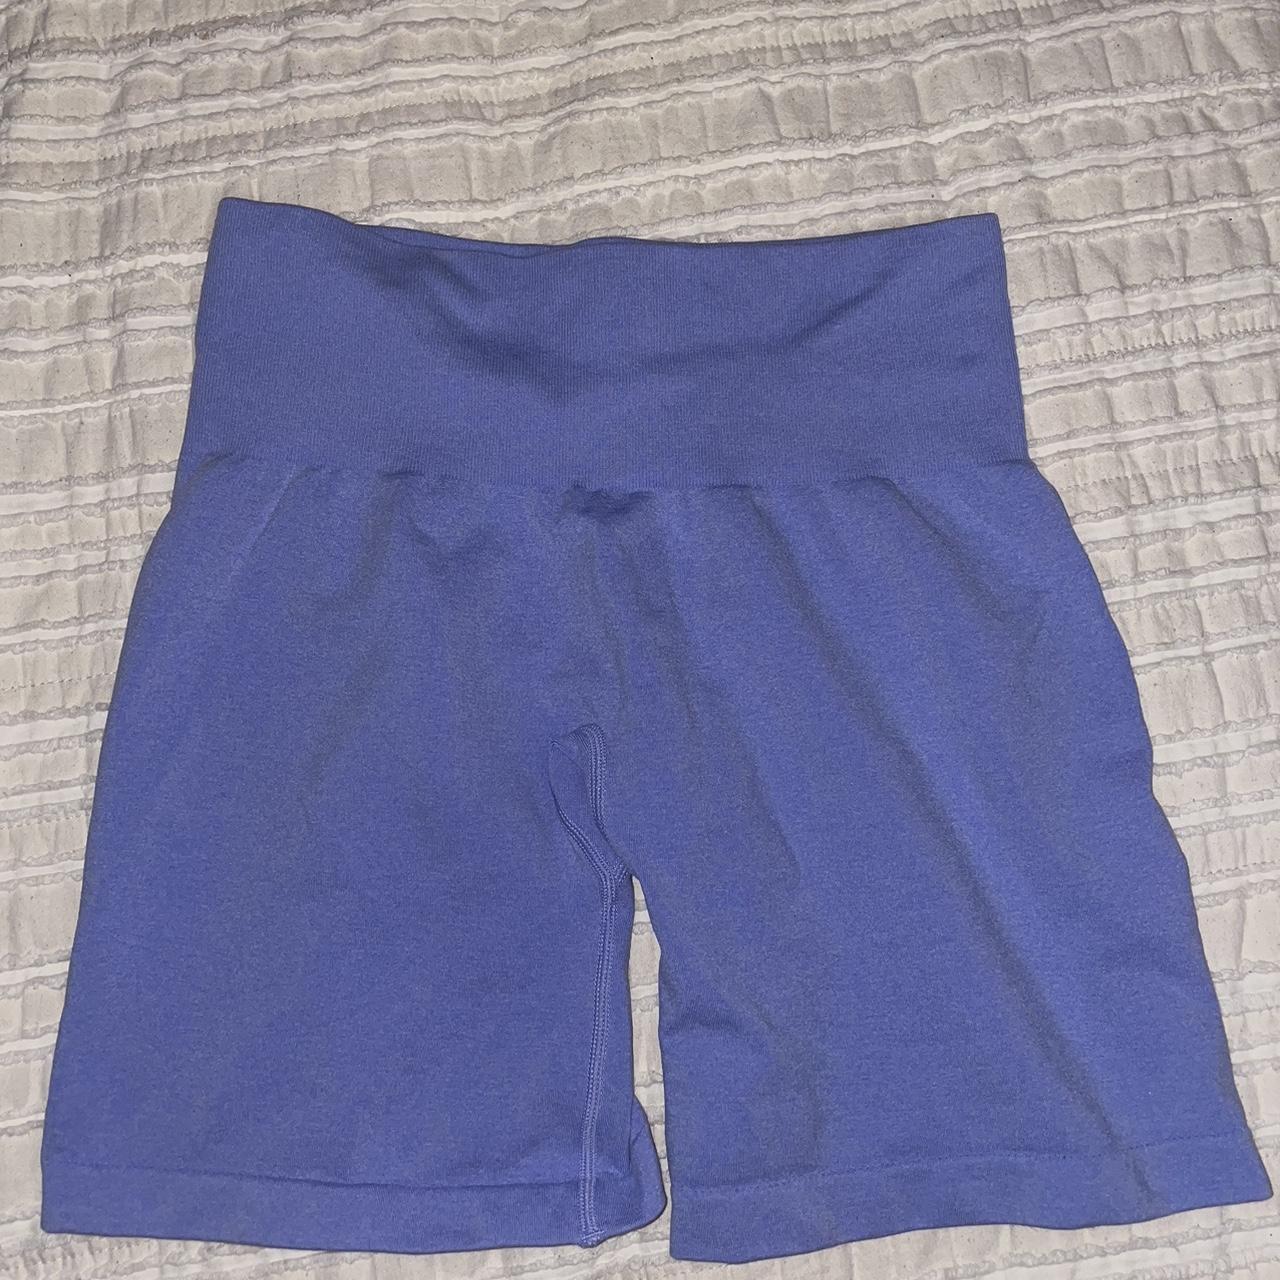 Periwinkle nvgtn shorts, size small. Only tried on. - Depop